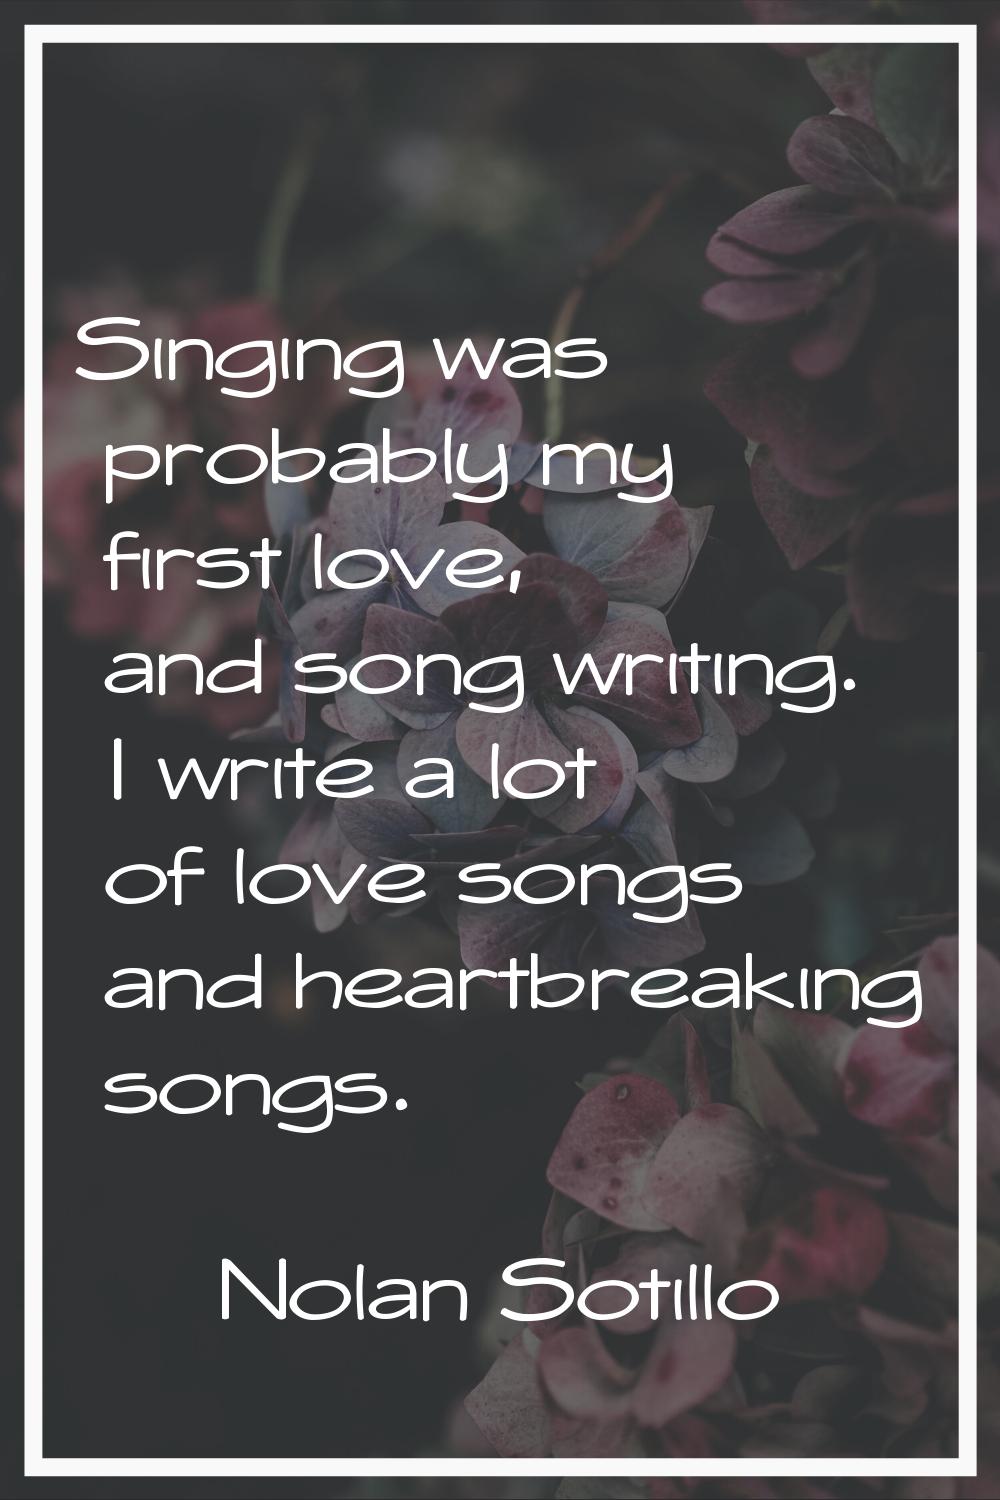 Singing was probably my first love, and song writing. I write a lot of love songs and heartbreaking